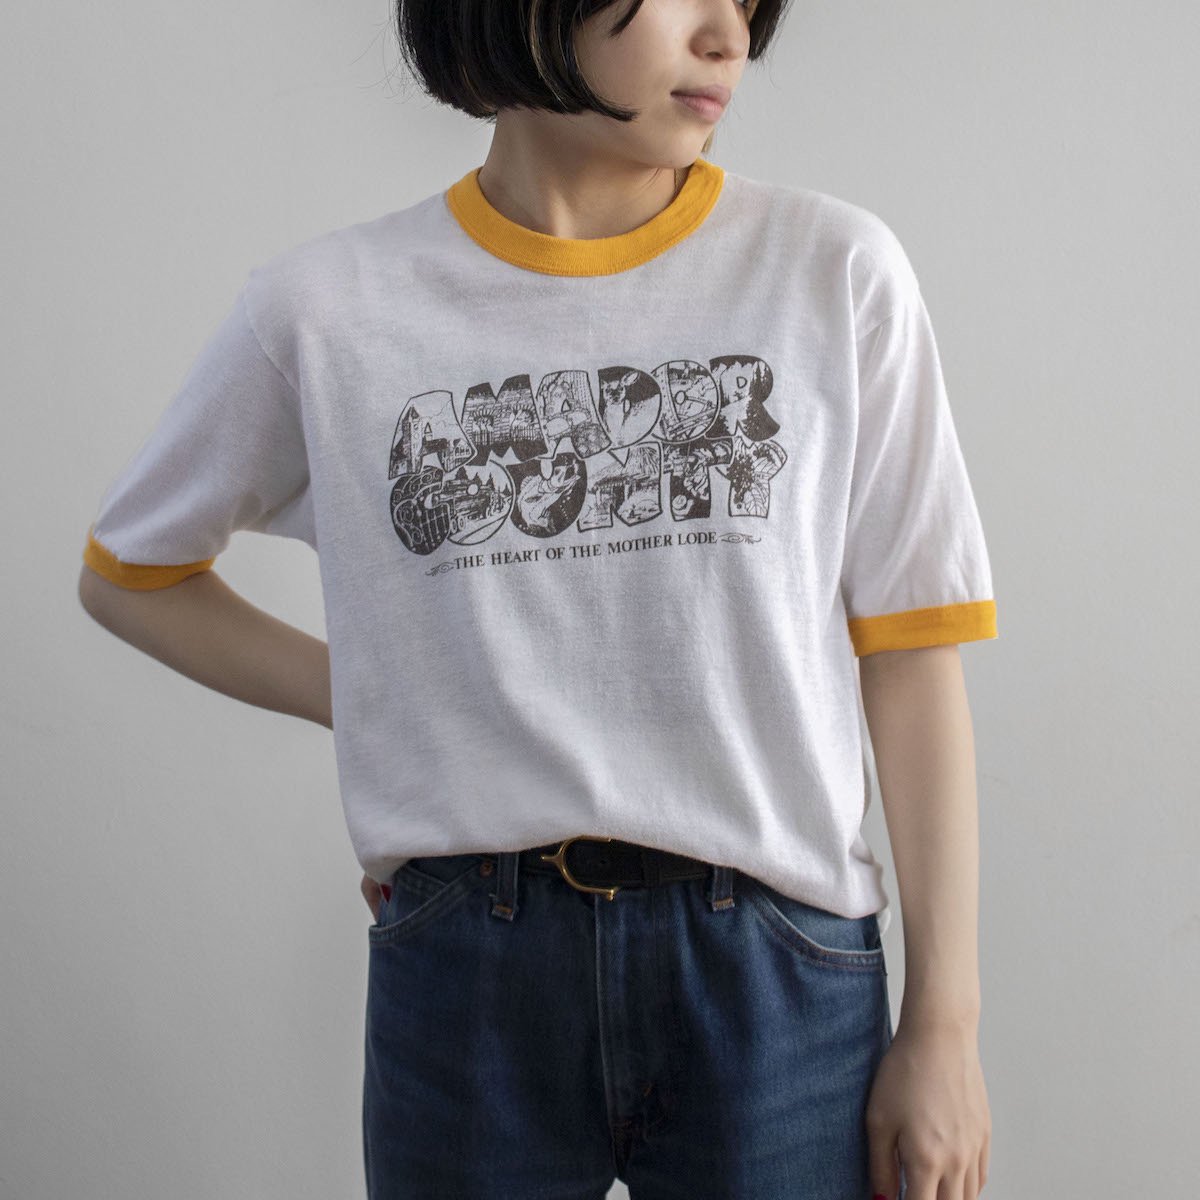 SizeS リンガーTシャツ 両面プリント 白×オレンジ 古着 古着屋 高円寺 